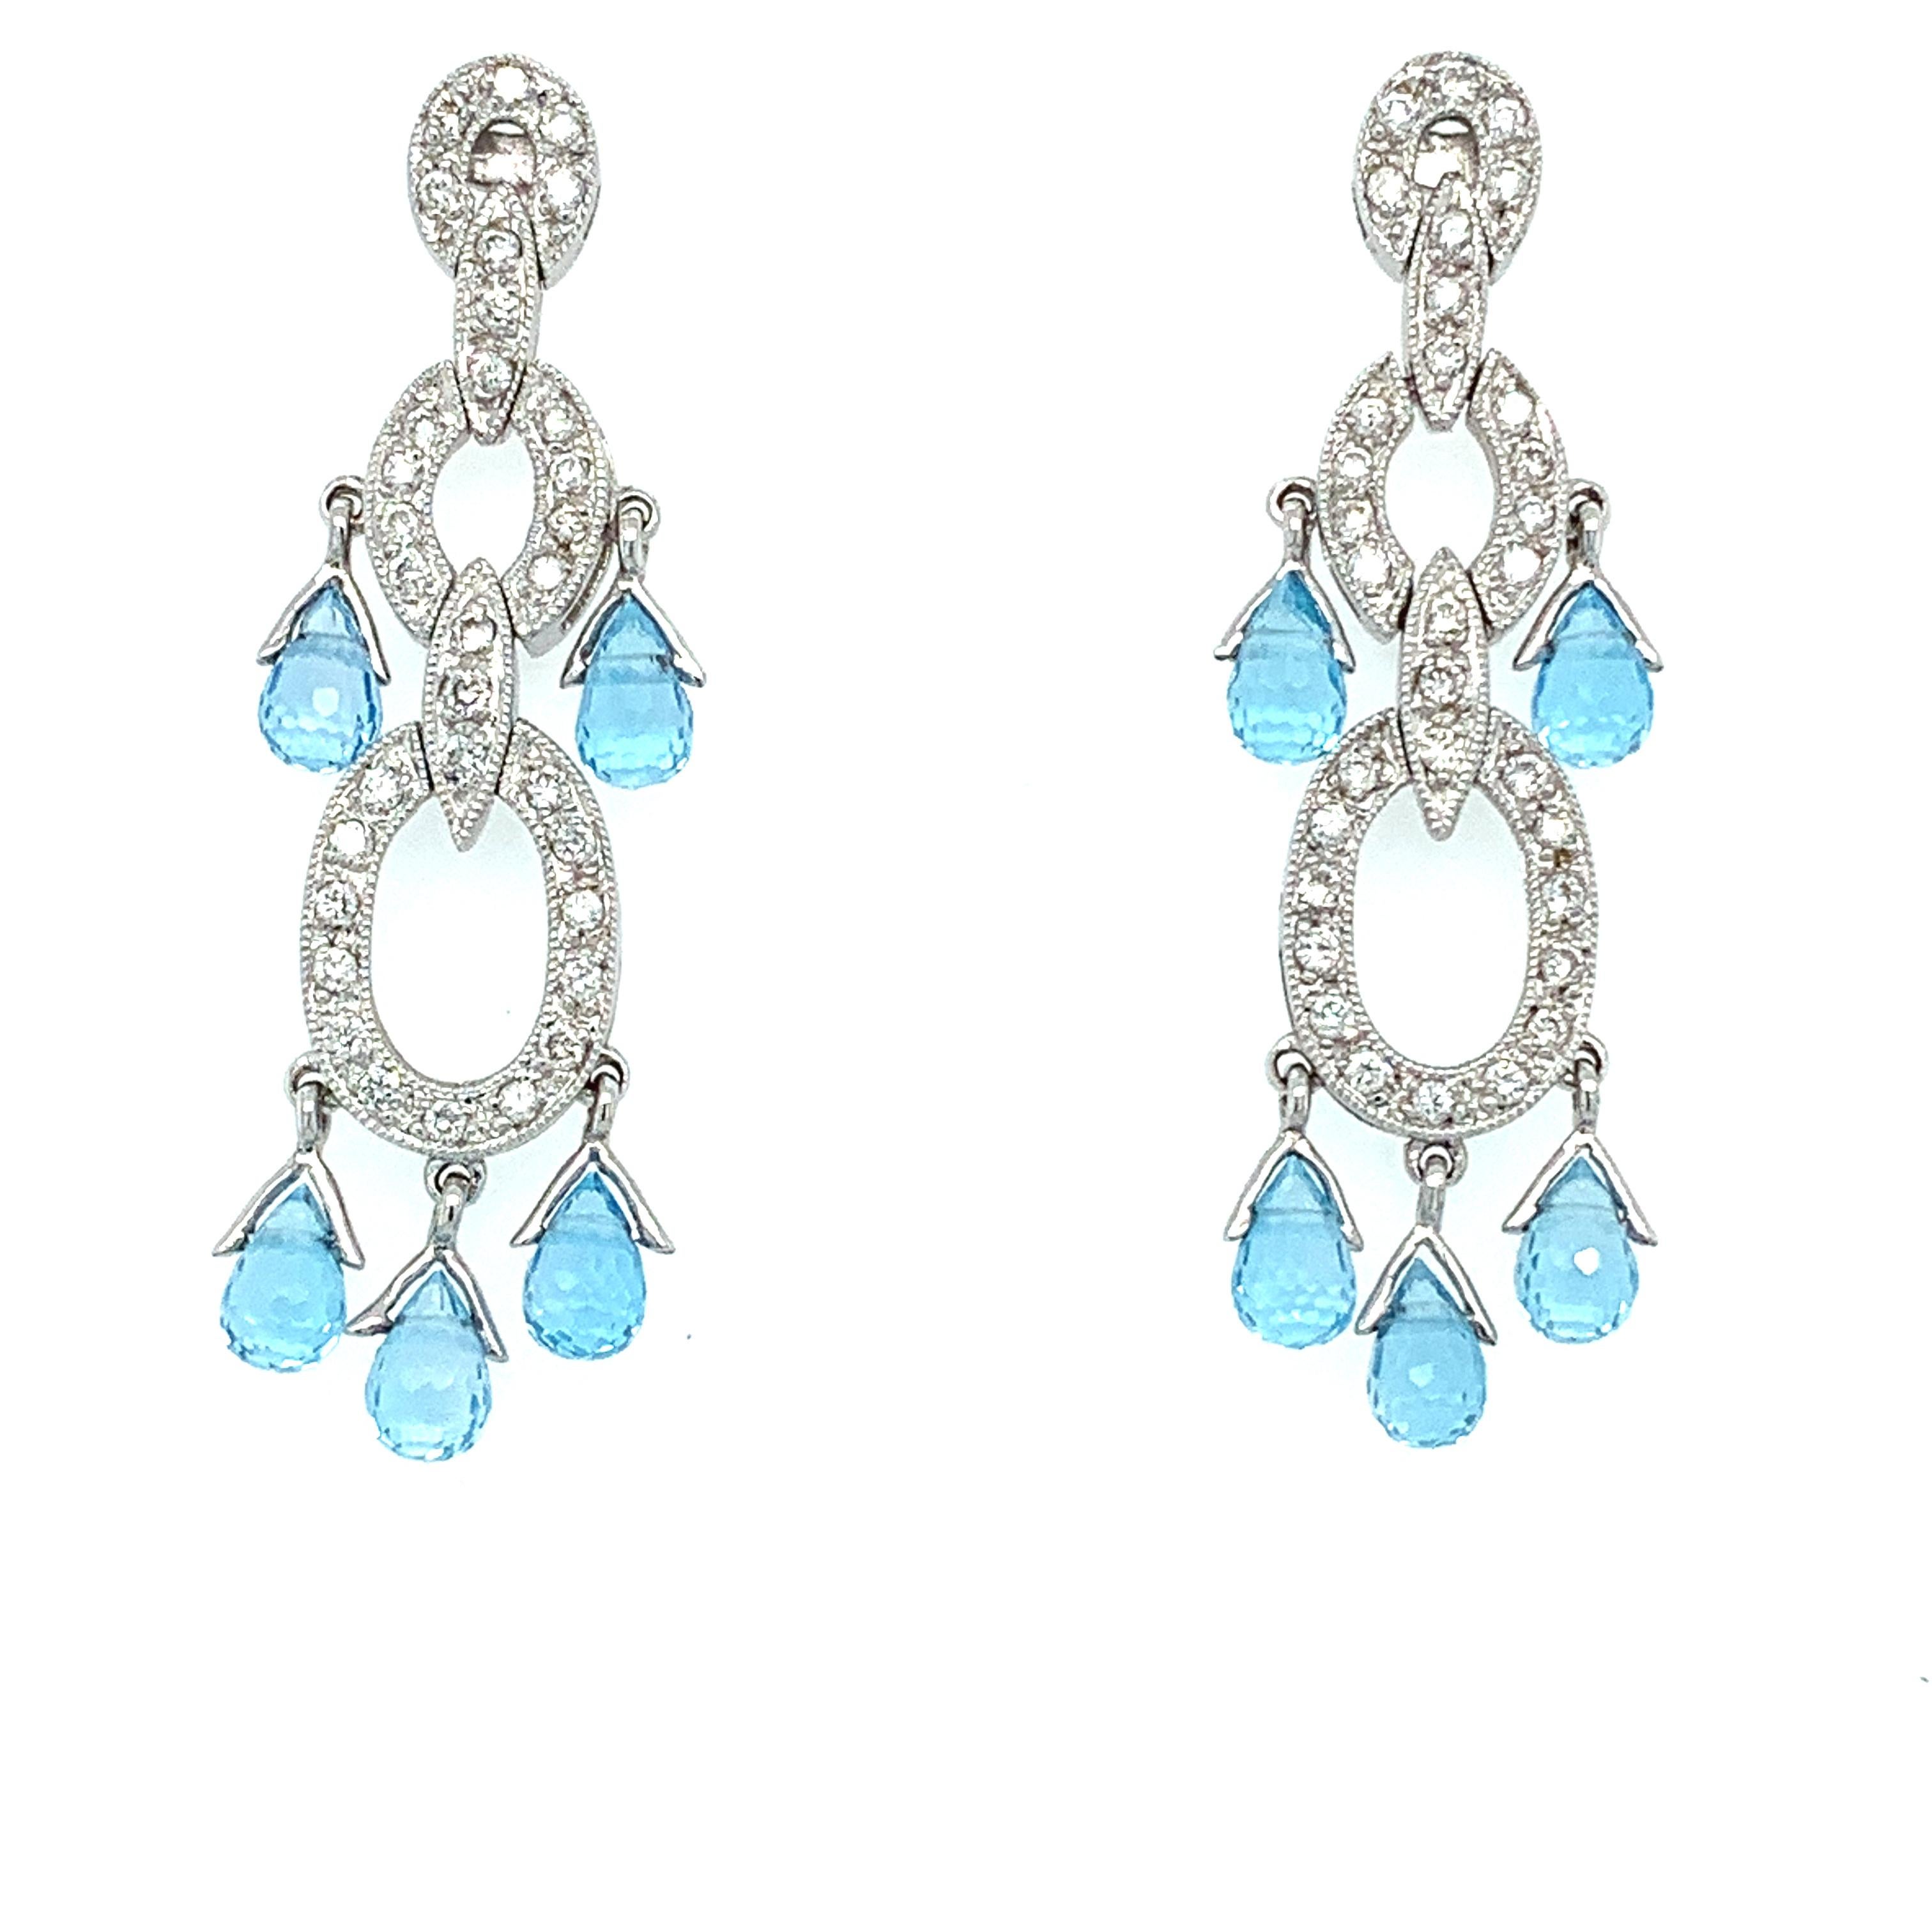 Beautiful aquamarine gemstone and diamonds drop dangle earrings in 18ct white gold. 
Composed of briolette old cut aquamarine gemstone light blue colour and accented by pave set fine quality diamonds.
Art deco cocktail style drop dangle earrings